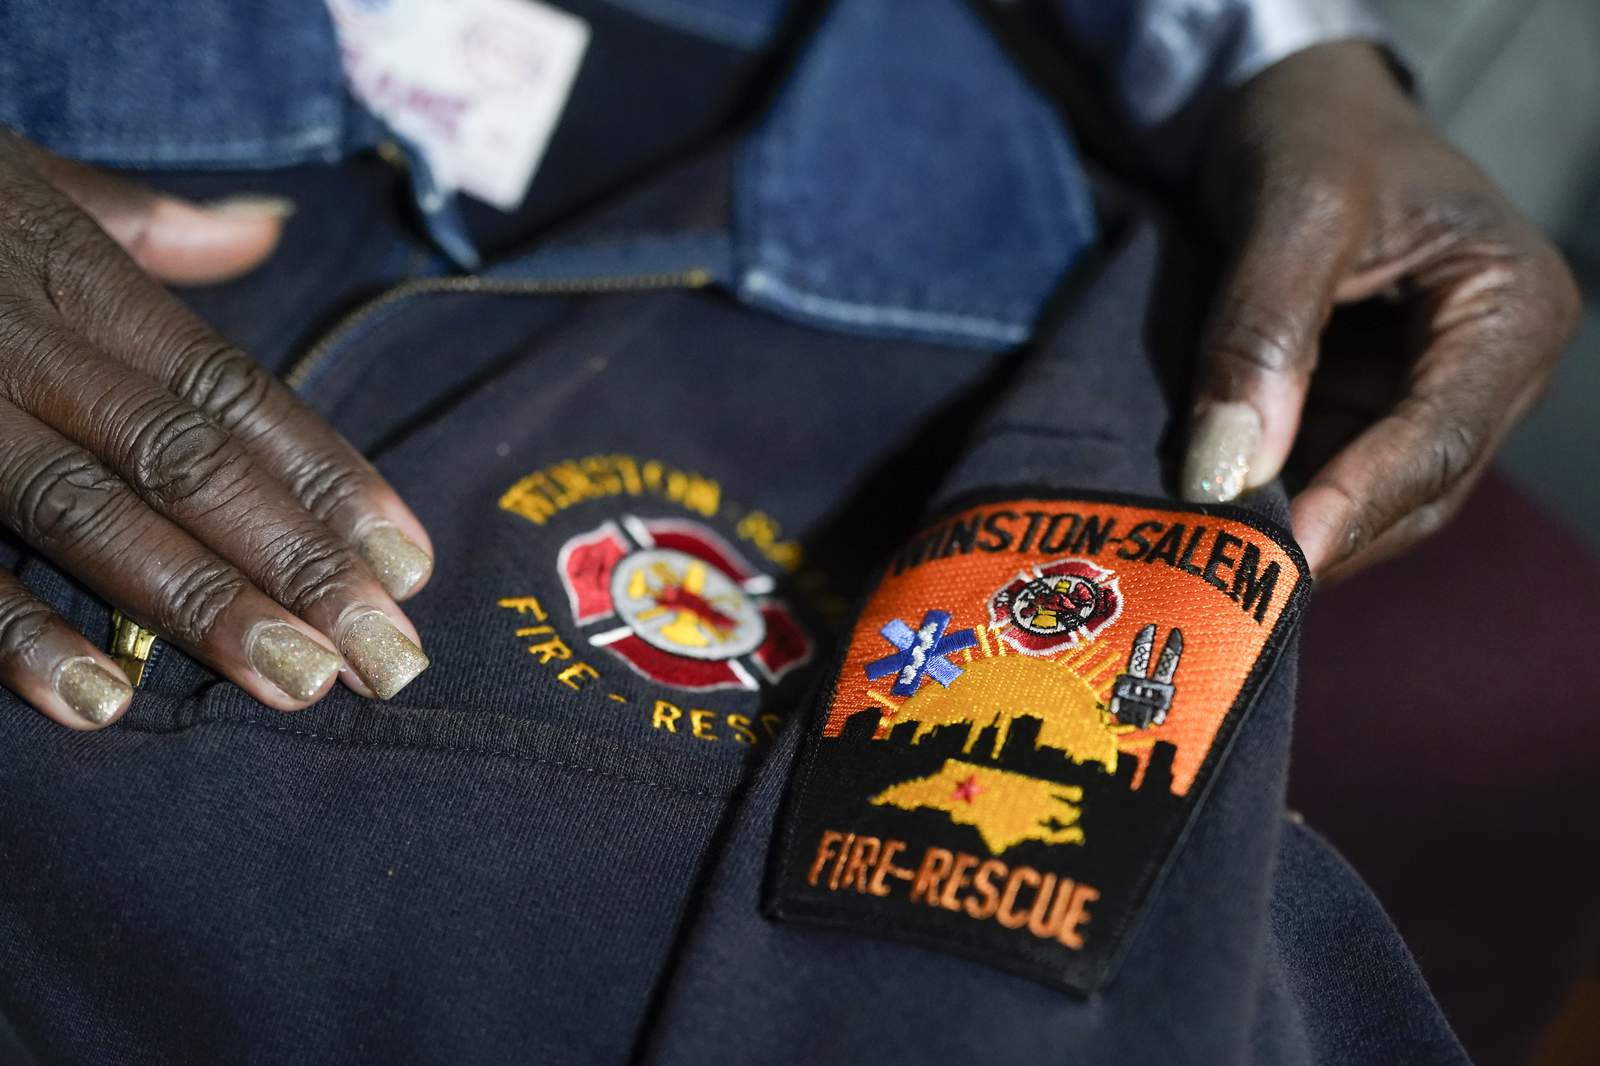 Black firefighters in NC allege racism amid larger reckoning